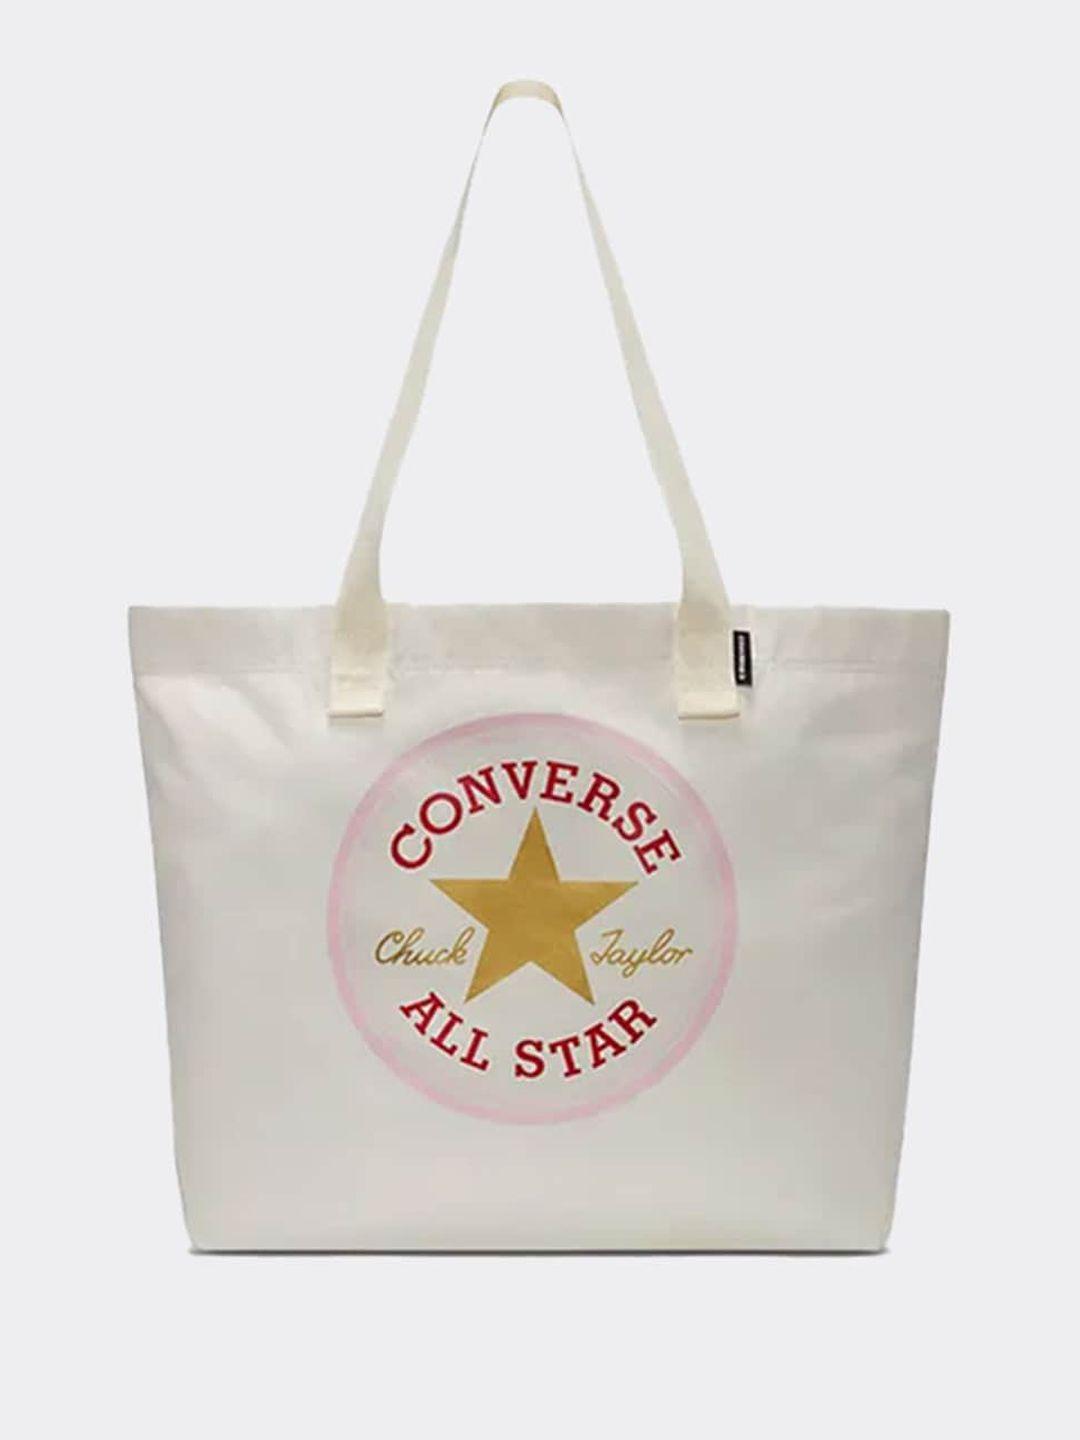 converse typography printed oversized shopper tote bag